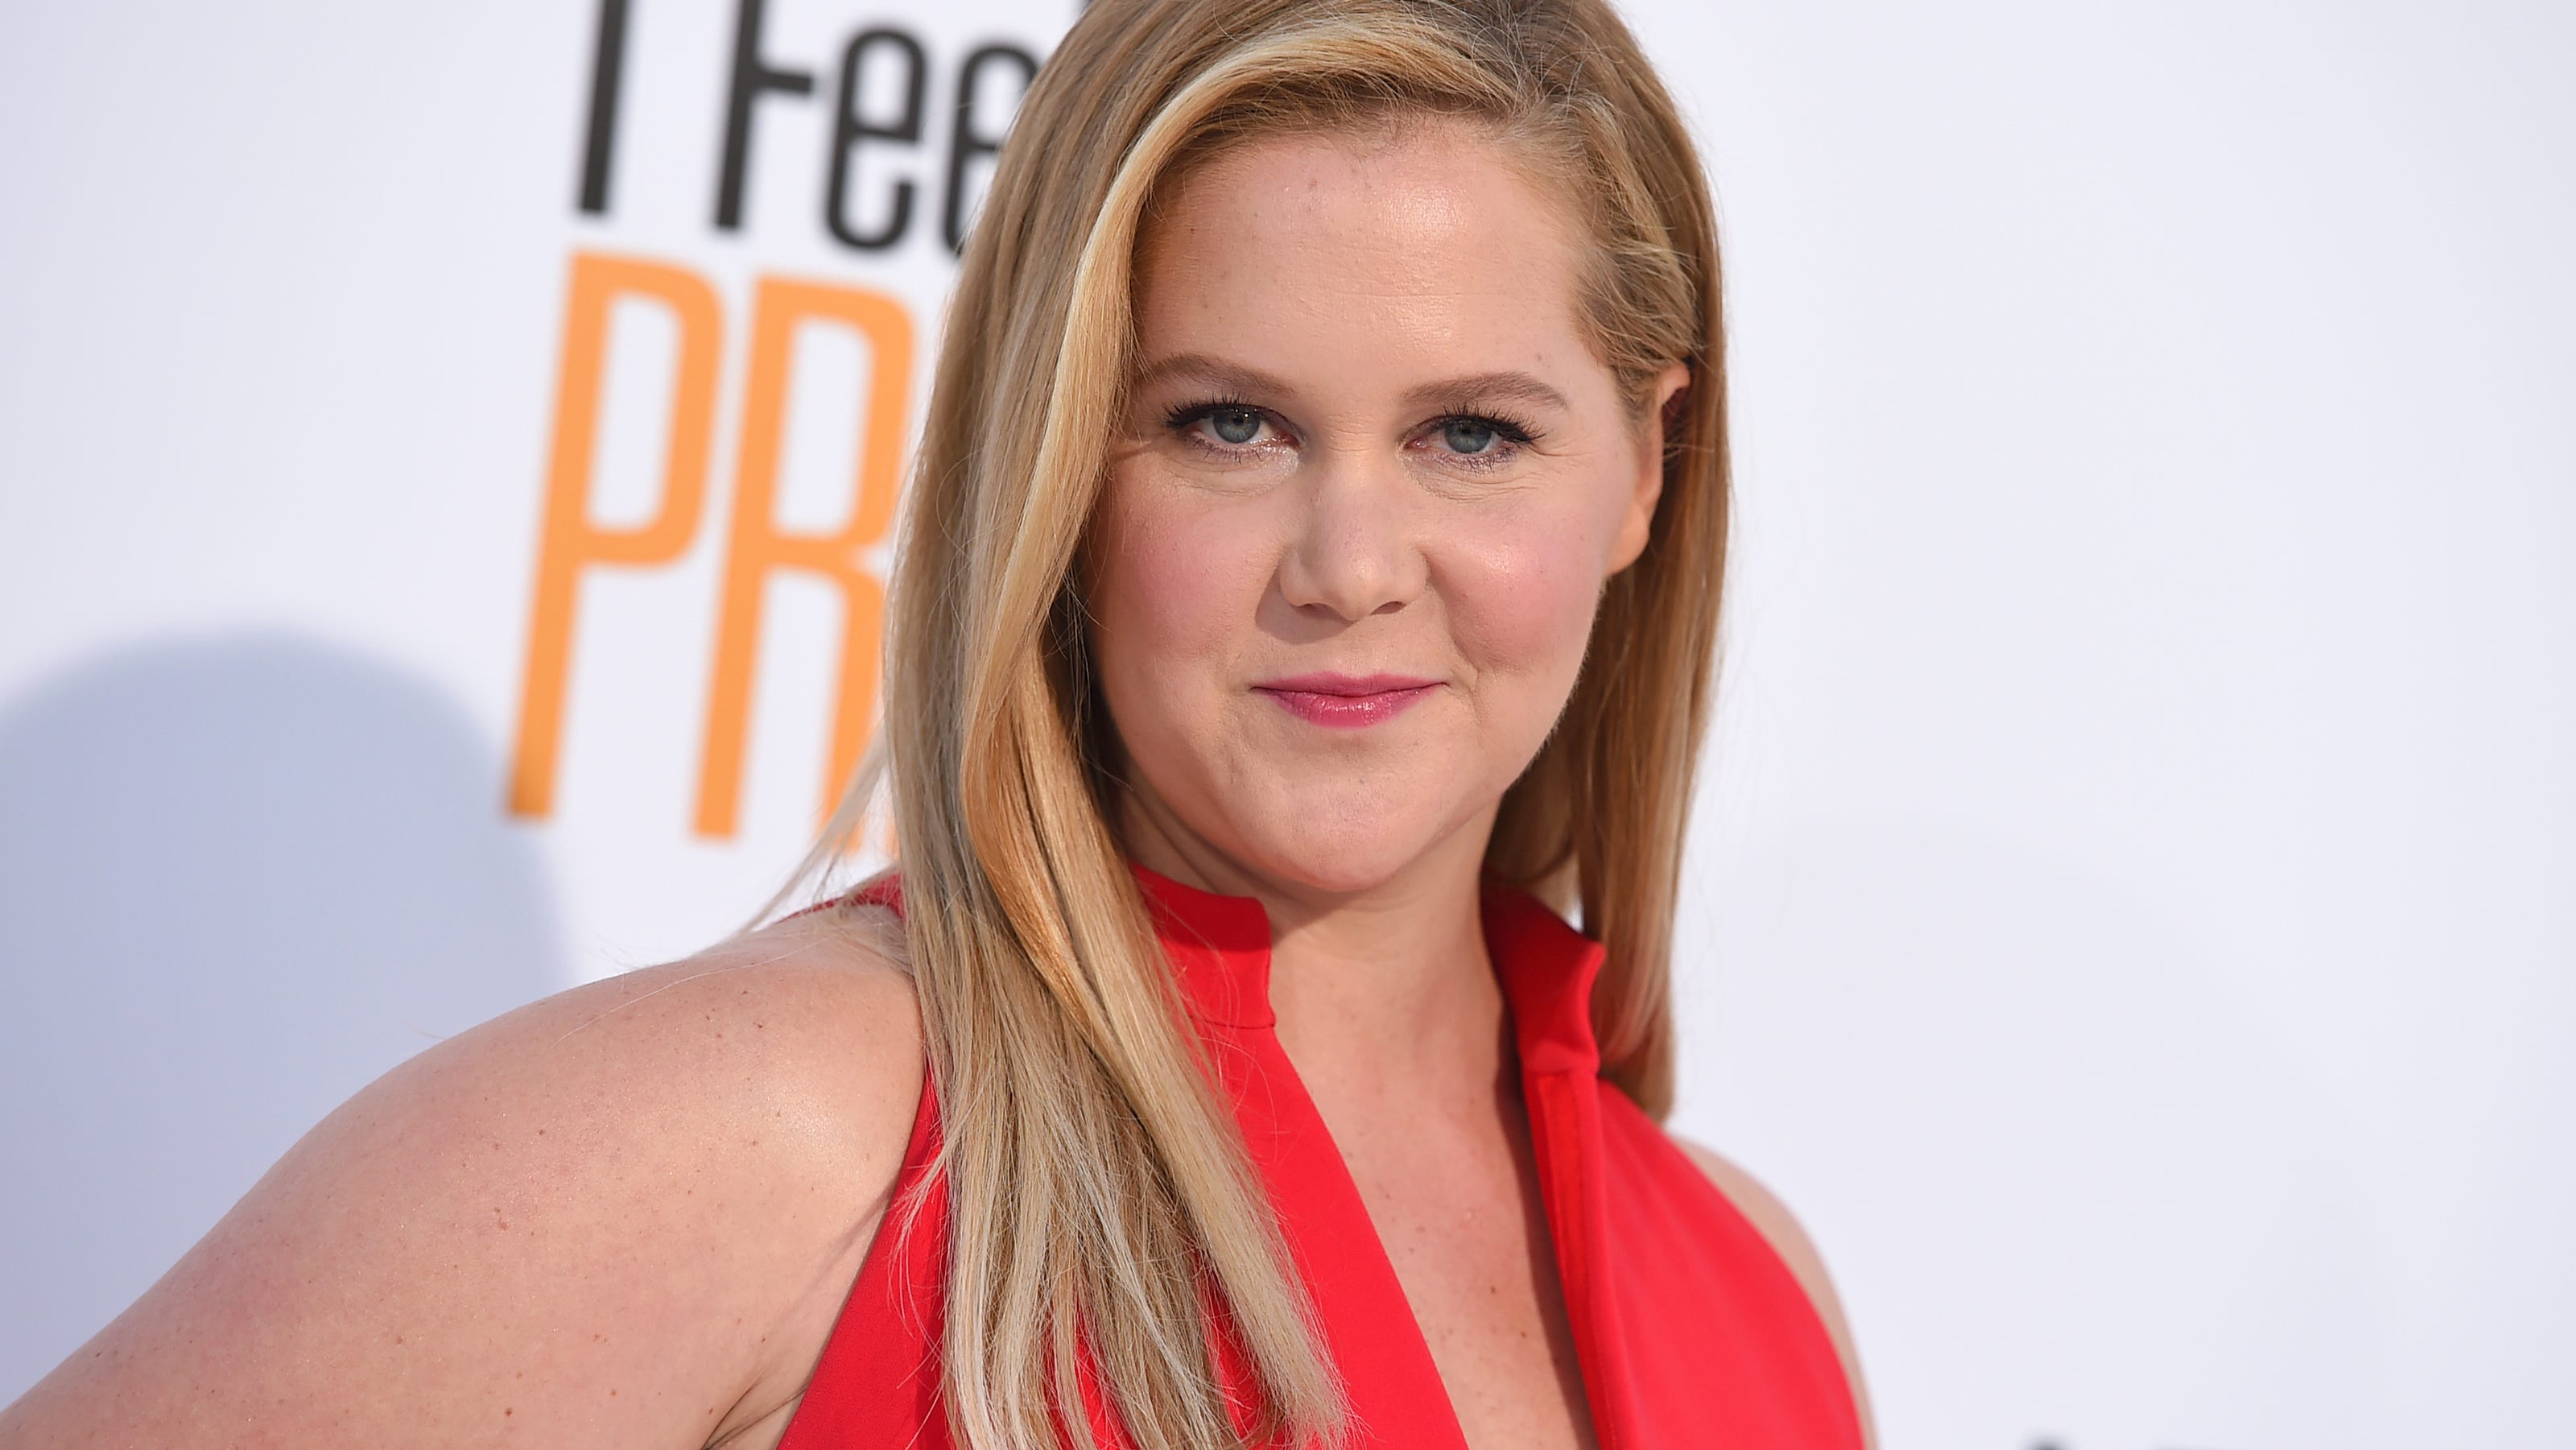 Fans applaud Amy Schumer for honoring National Bikini Day with graphic phot...